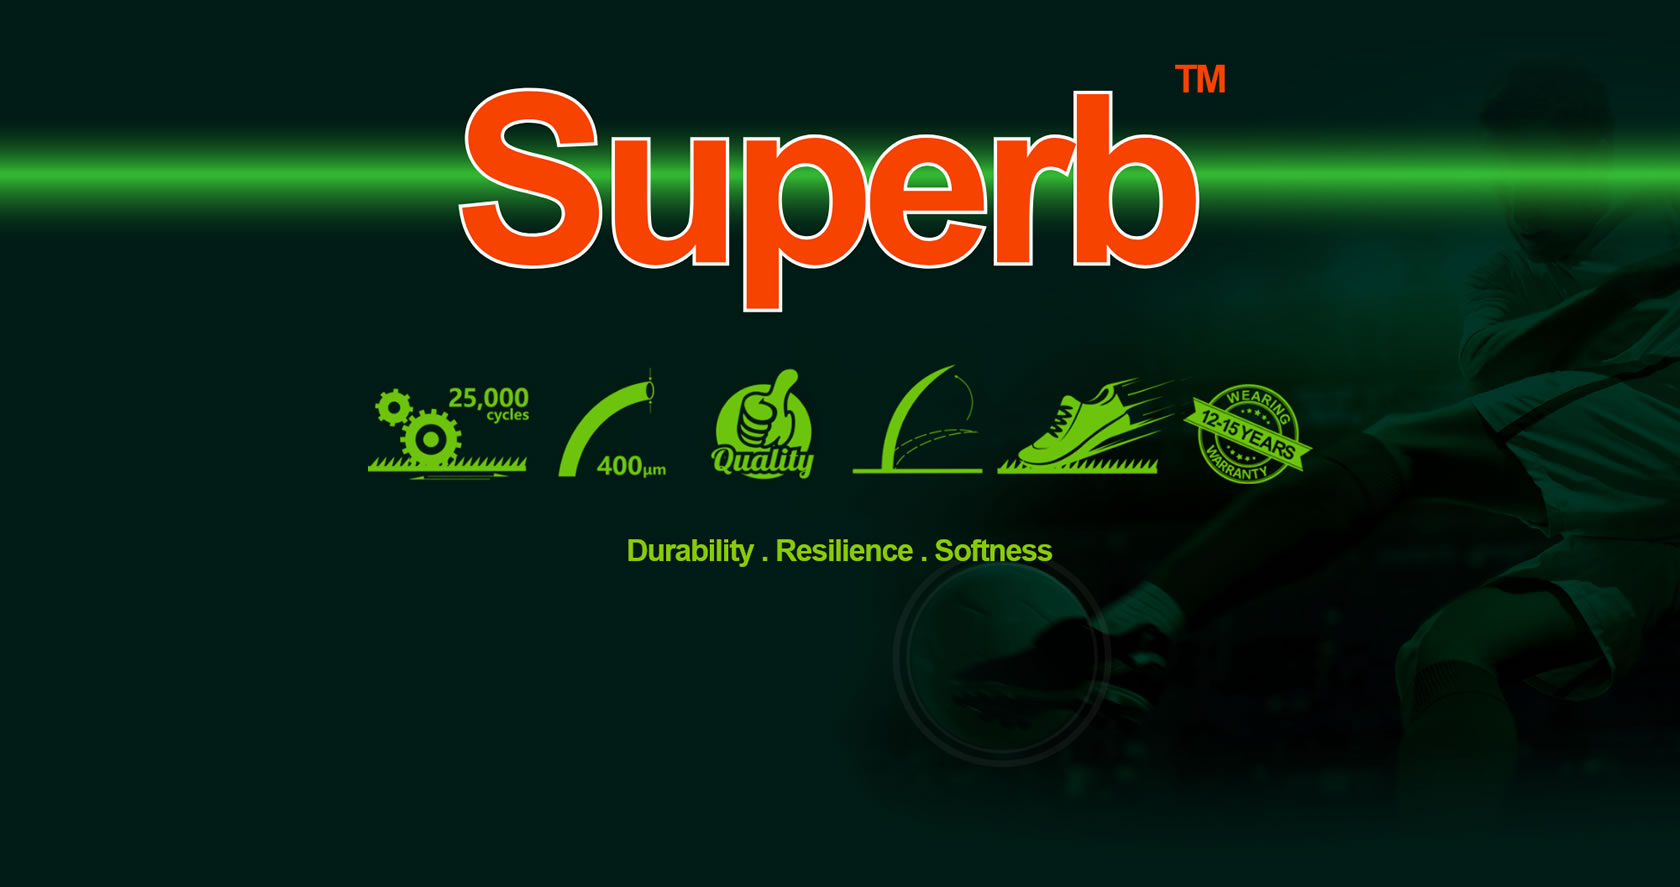 CCGrass innovation artificial turf for Superb, durability, resilience and softness